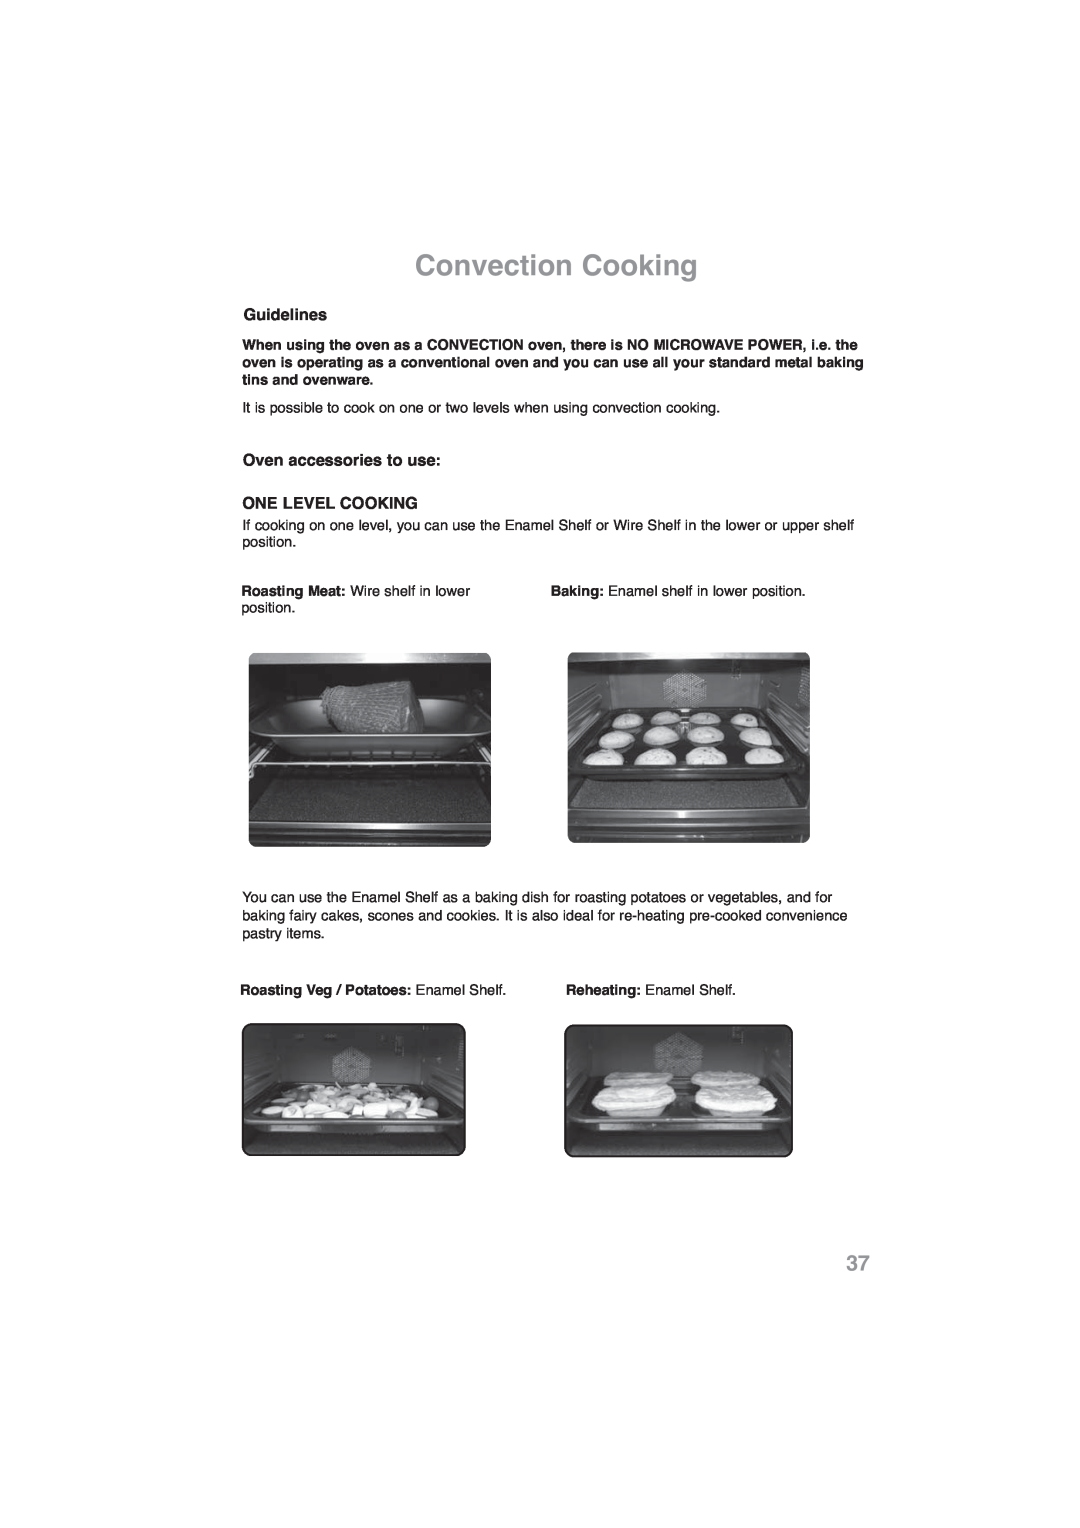 Panasonic NN-CF778S, NN-CF768M Convection Cooking, Guidelines, Oven accessories to use ONE LEVEL COOKING 